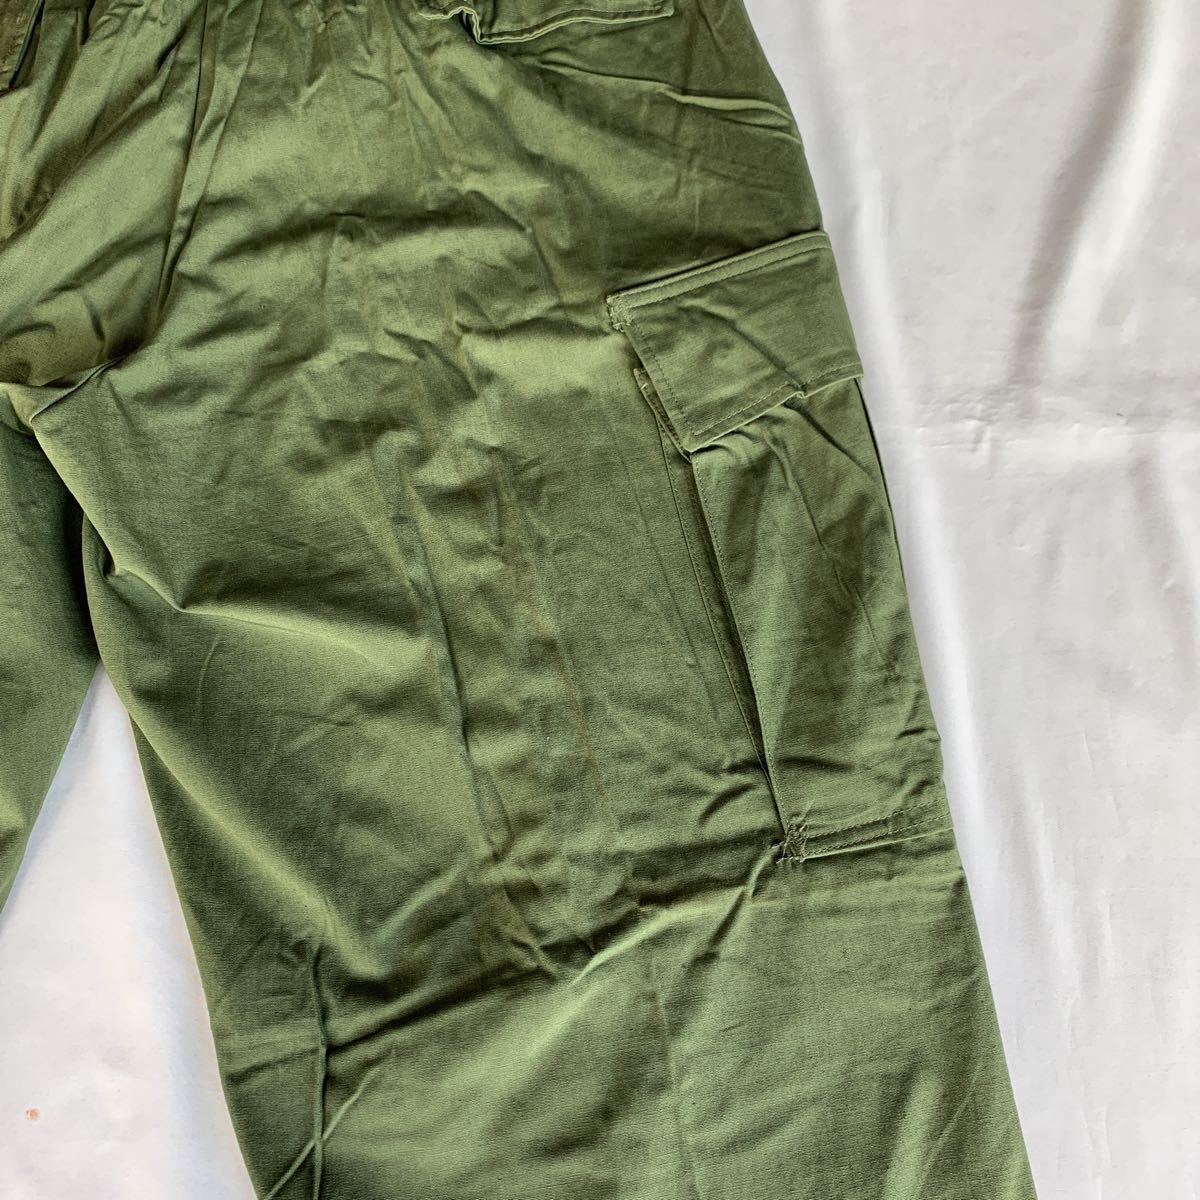 60s U.S.ARMY JUNGLE FATIGUE TROUSERS 3rd DEAD STOCK USARMY ジャングルファティーグ カーゴパンツ ノンリップ デッドストック 送料無料 _画像10